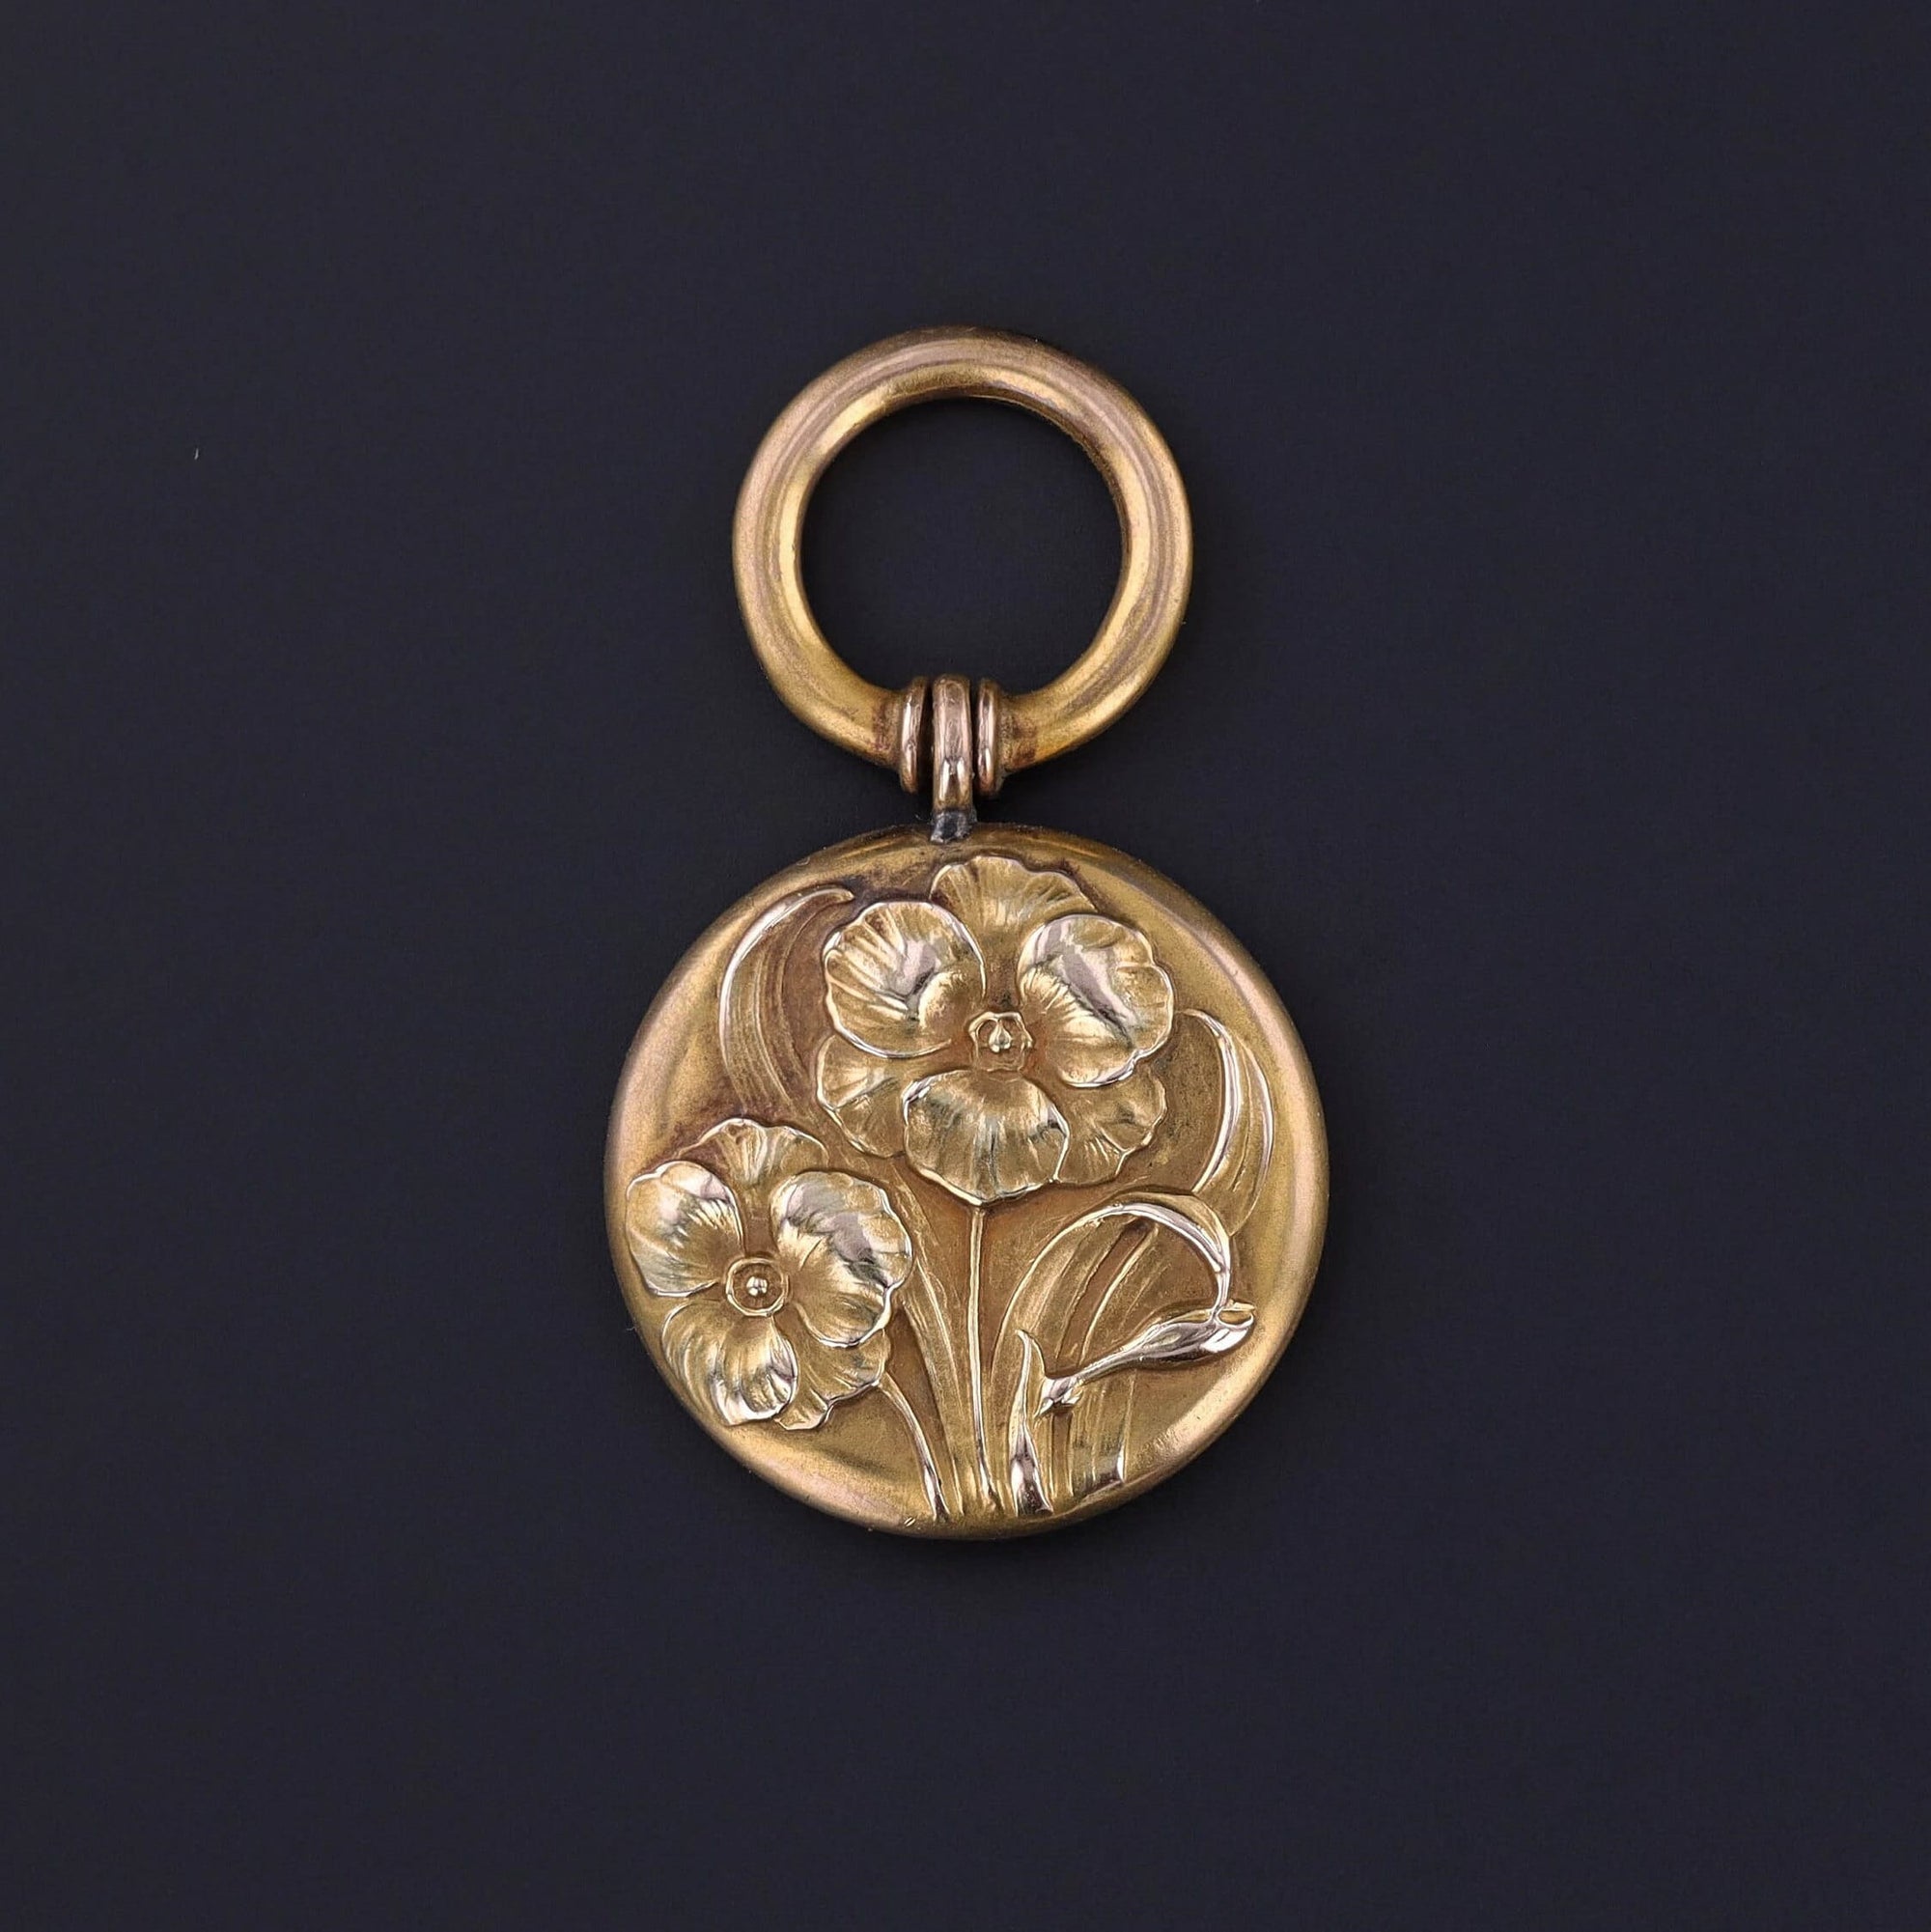 A floral treasure from the turn of the 20th century. This 10k gold pendant is embossed with a floral design on the front and a large bolt ring for dramatic effect. The reverse bears the inscription &#39;F. R. of Beunos Ayres (Aires) May 1904&#39;.